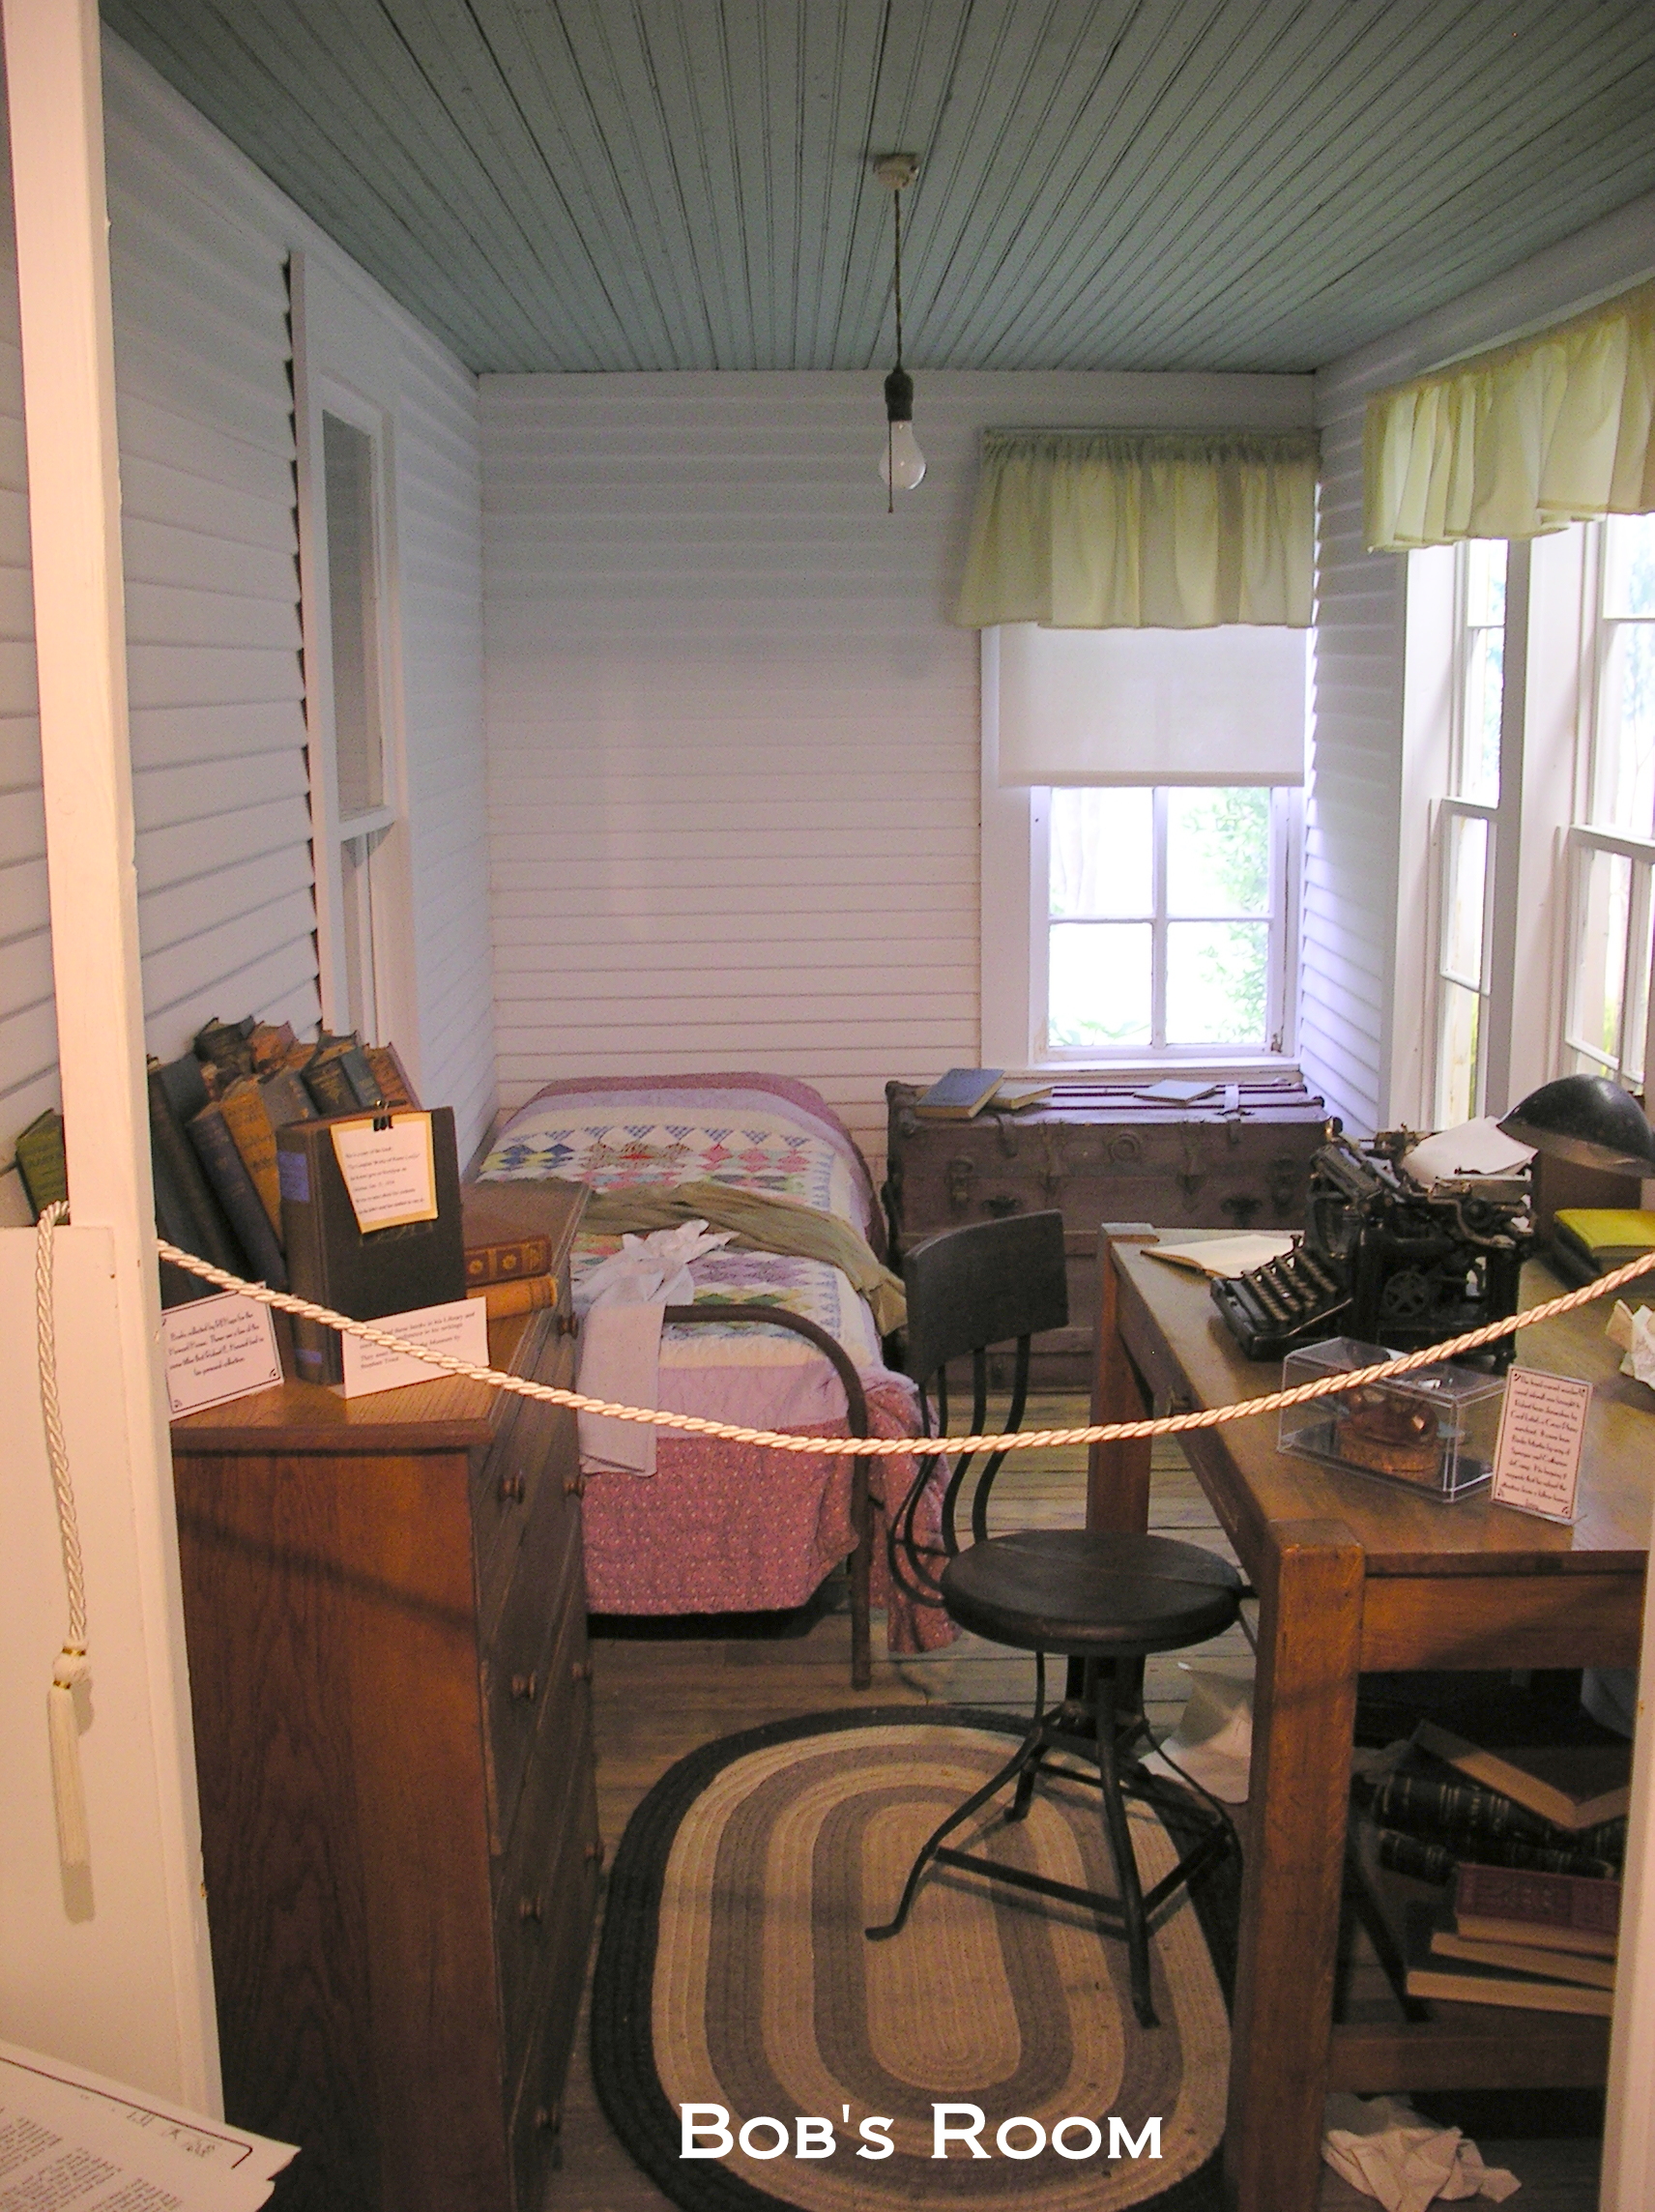 Robert E. Howard's bedroom and writing space, incl. his typewriter. Cross Plains, TX. Photo provided by The Robert E. Howard Foundation